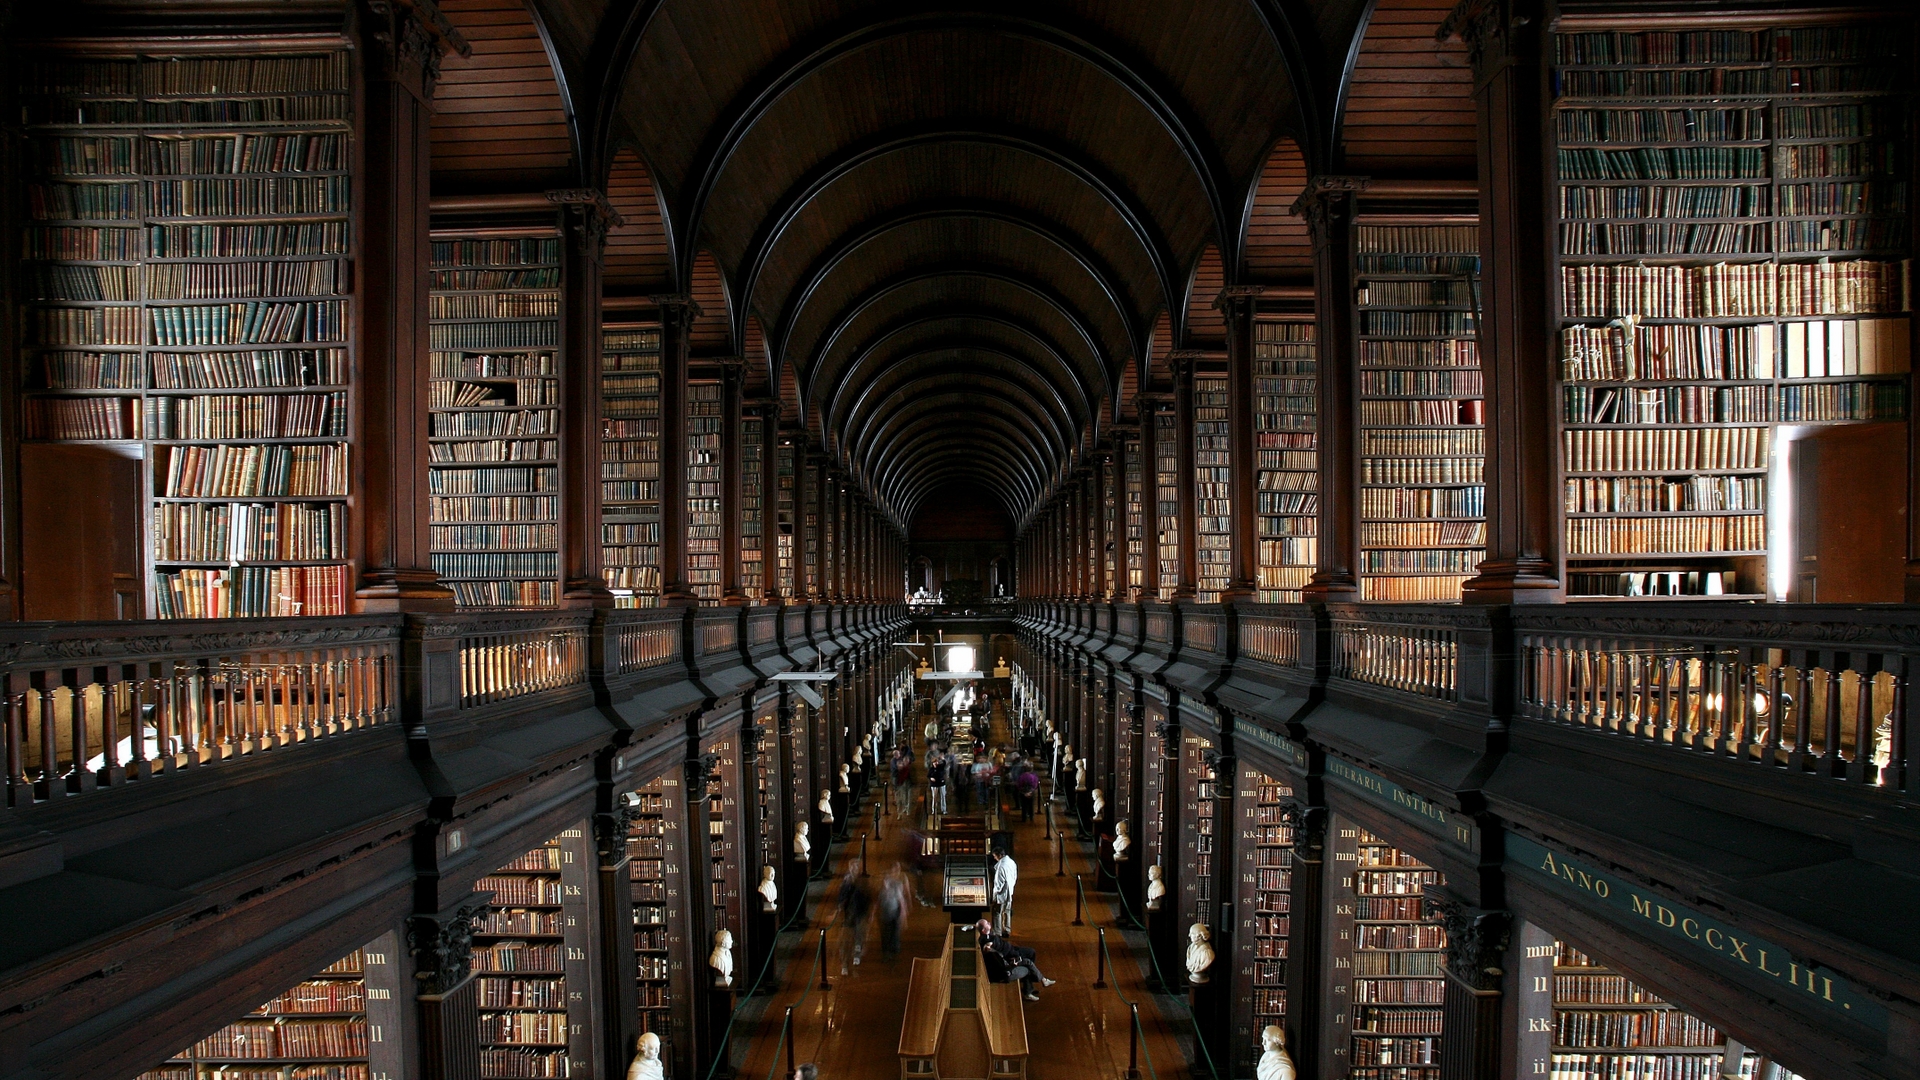 library, man made, room, book